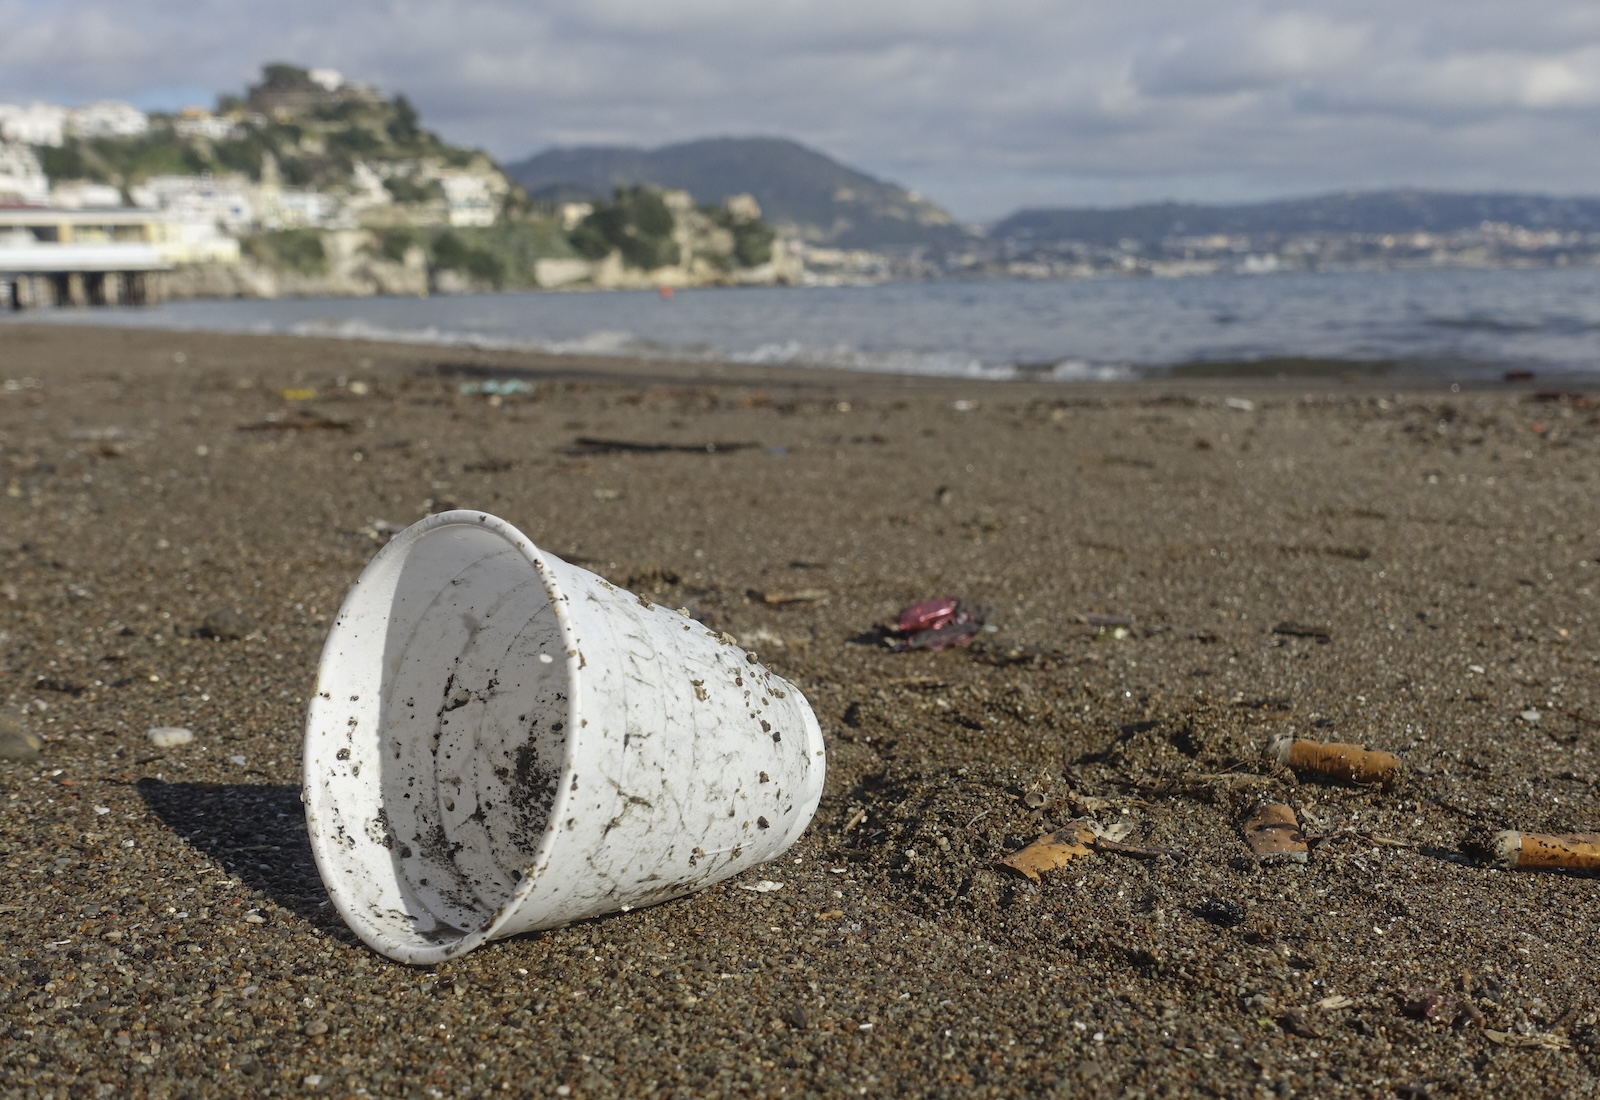 An empty plastic cup sits on its side on a beach, with water and buildings in the background.